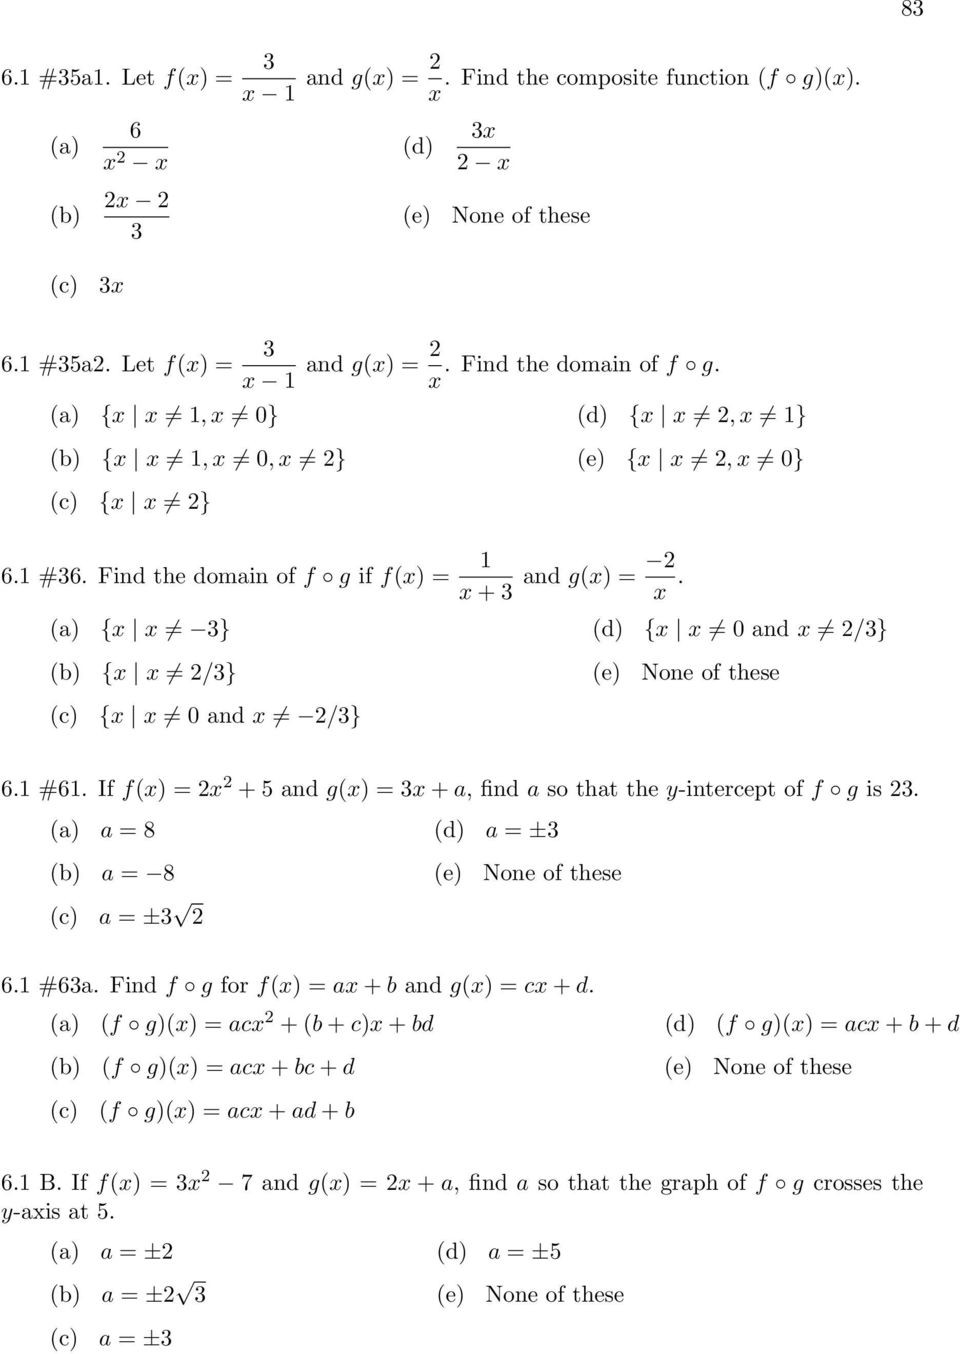 Evaluating Functions Worksheet Algebra 1 Exponential and Logarithmic Functions Pdf Free Download